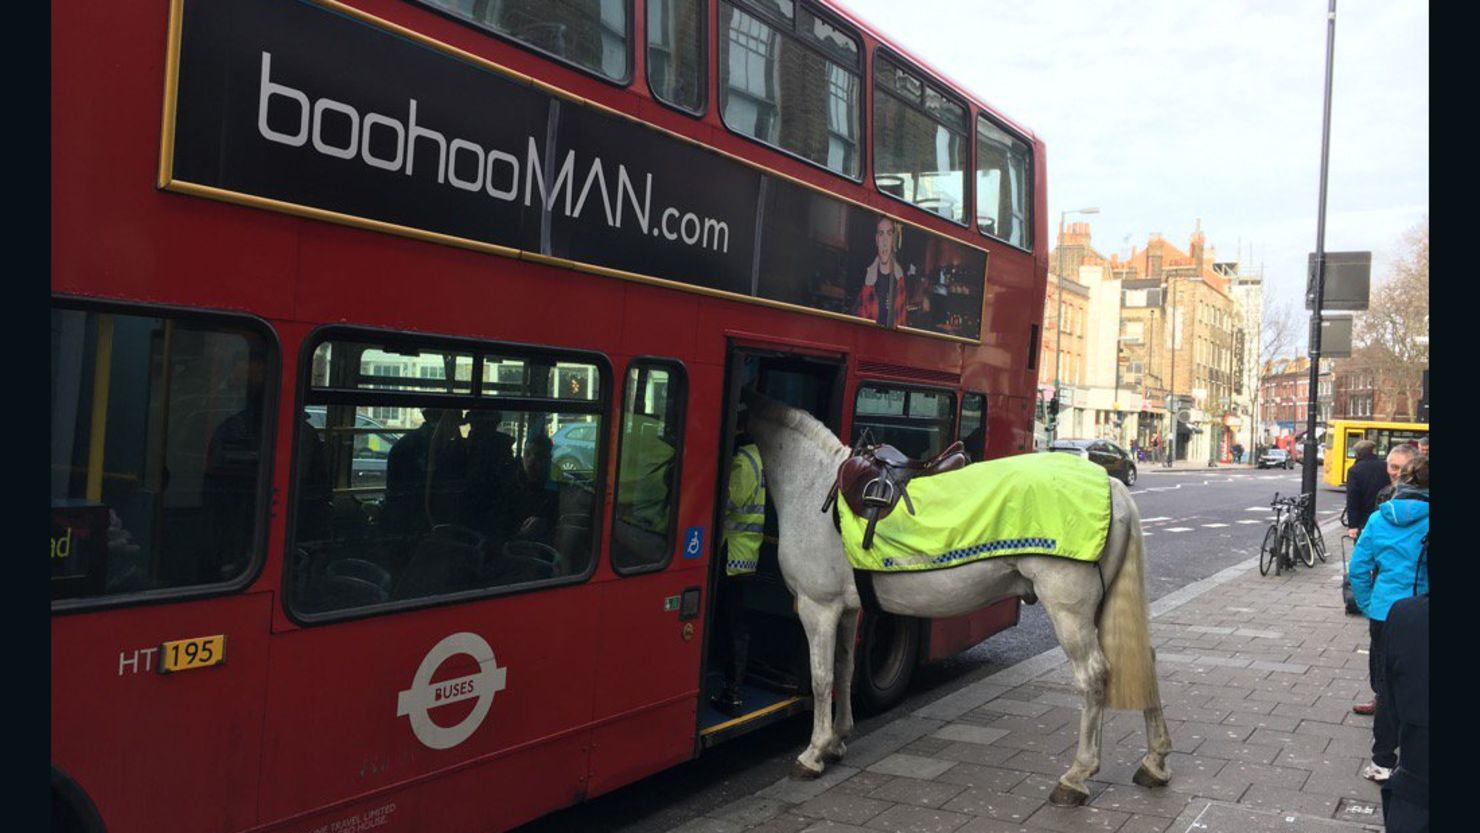 Horsing around in London: This image has been widely shared since it was posted Tuesday.